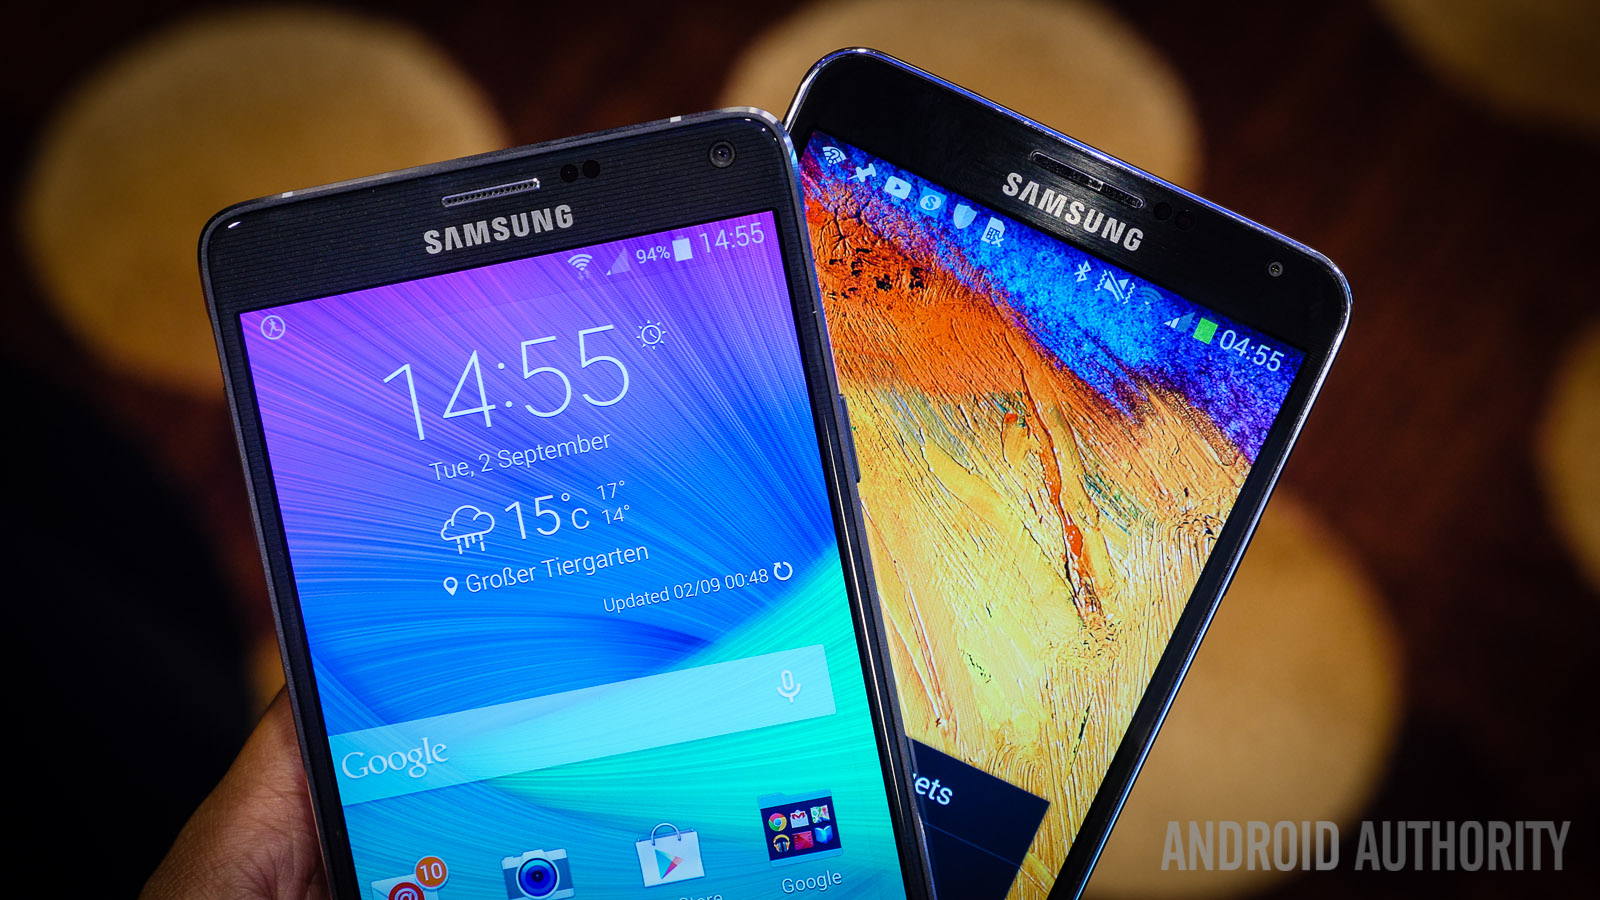 samsung galaxy note 4 vs note 3 quick look aa (7 of 11)